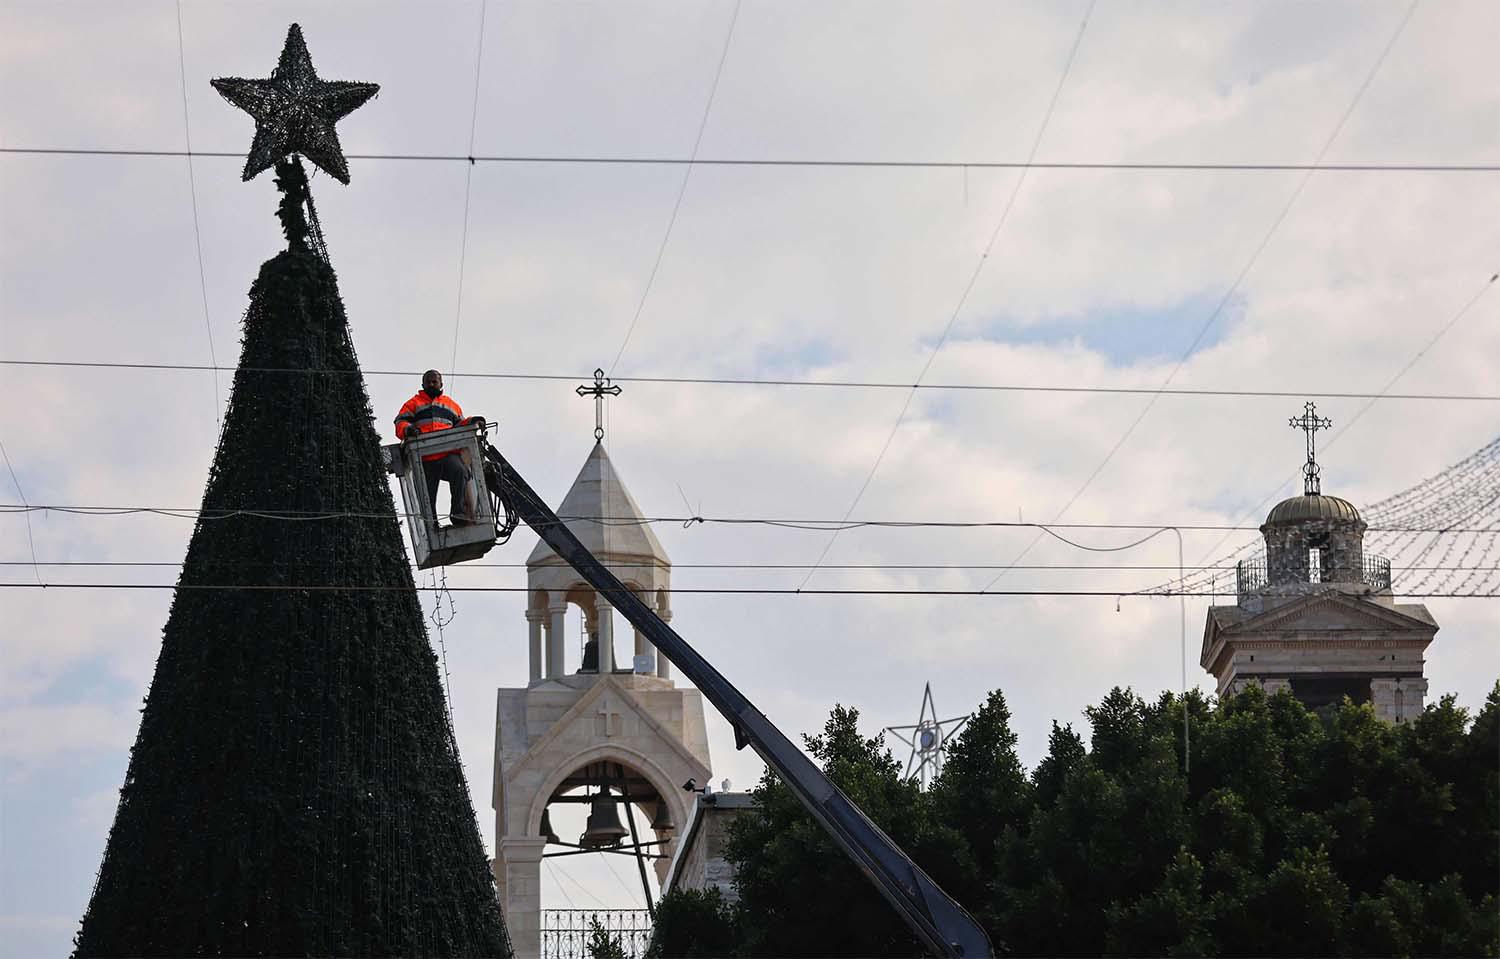 A worker sets up lights on a giant Christmas tree at the Church of the Nativity compound 